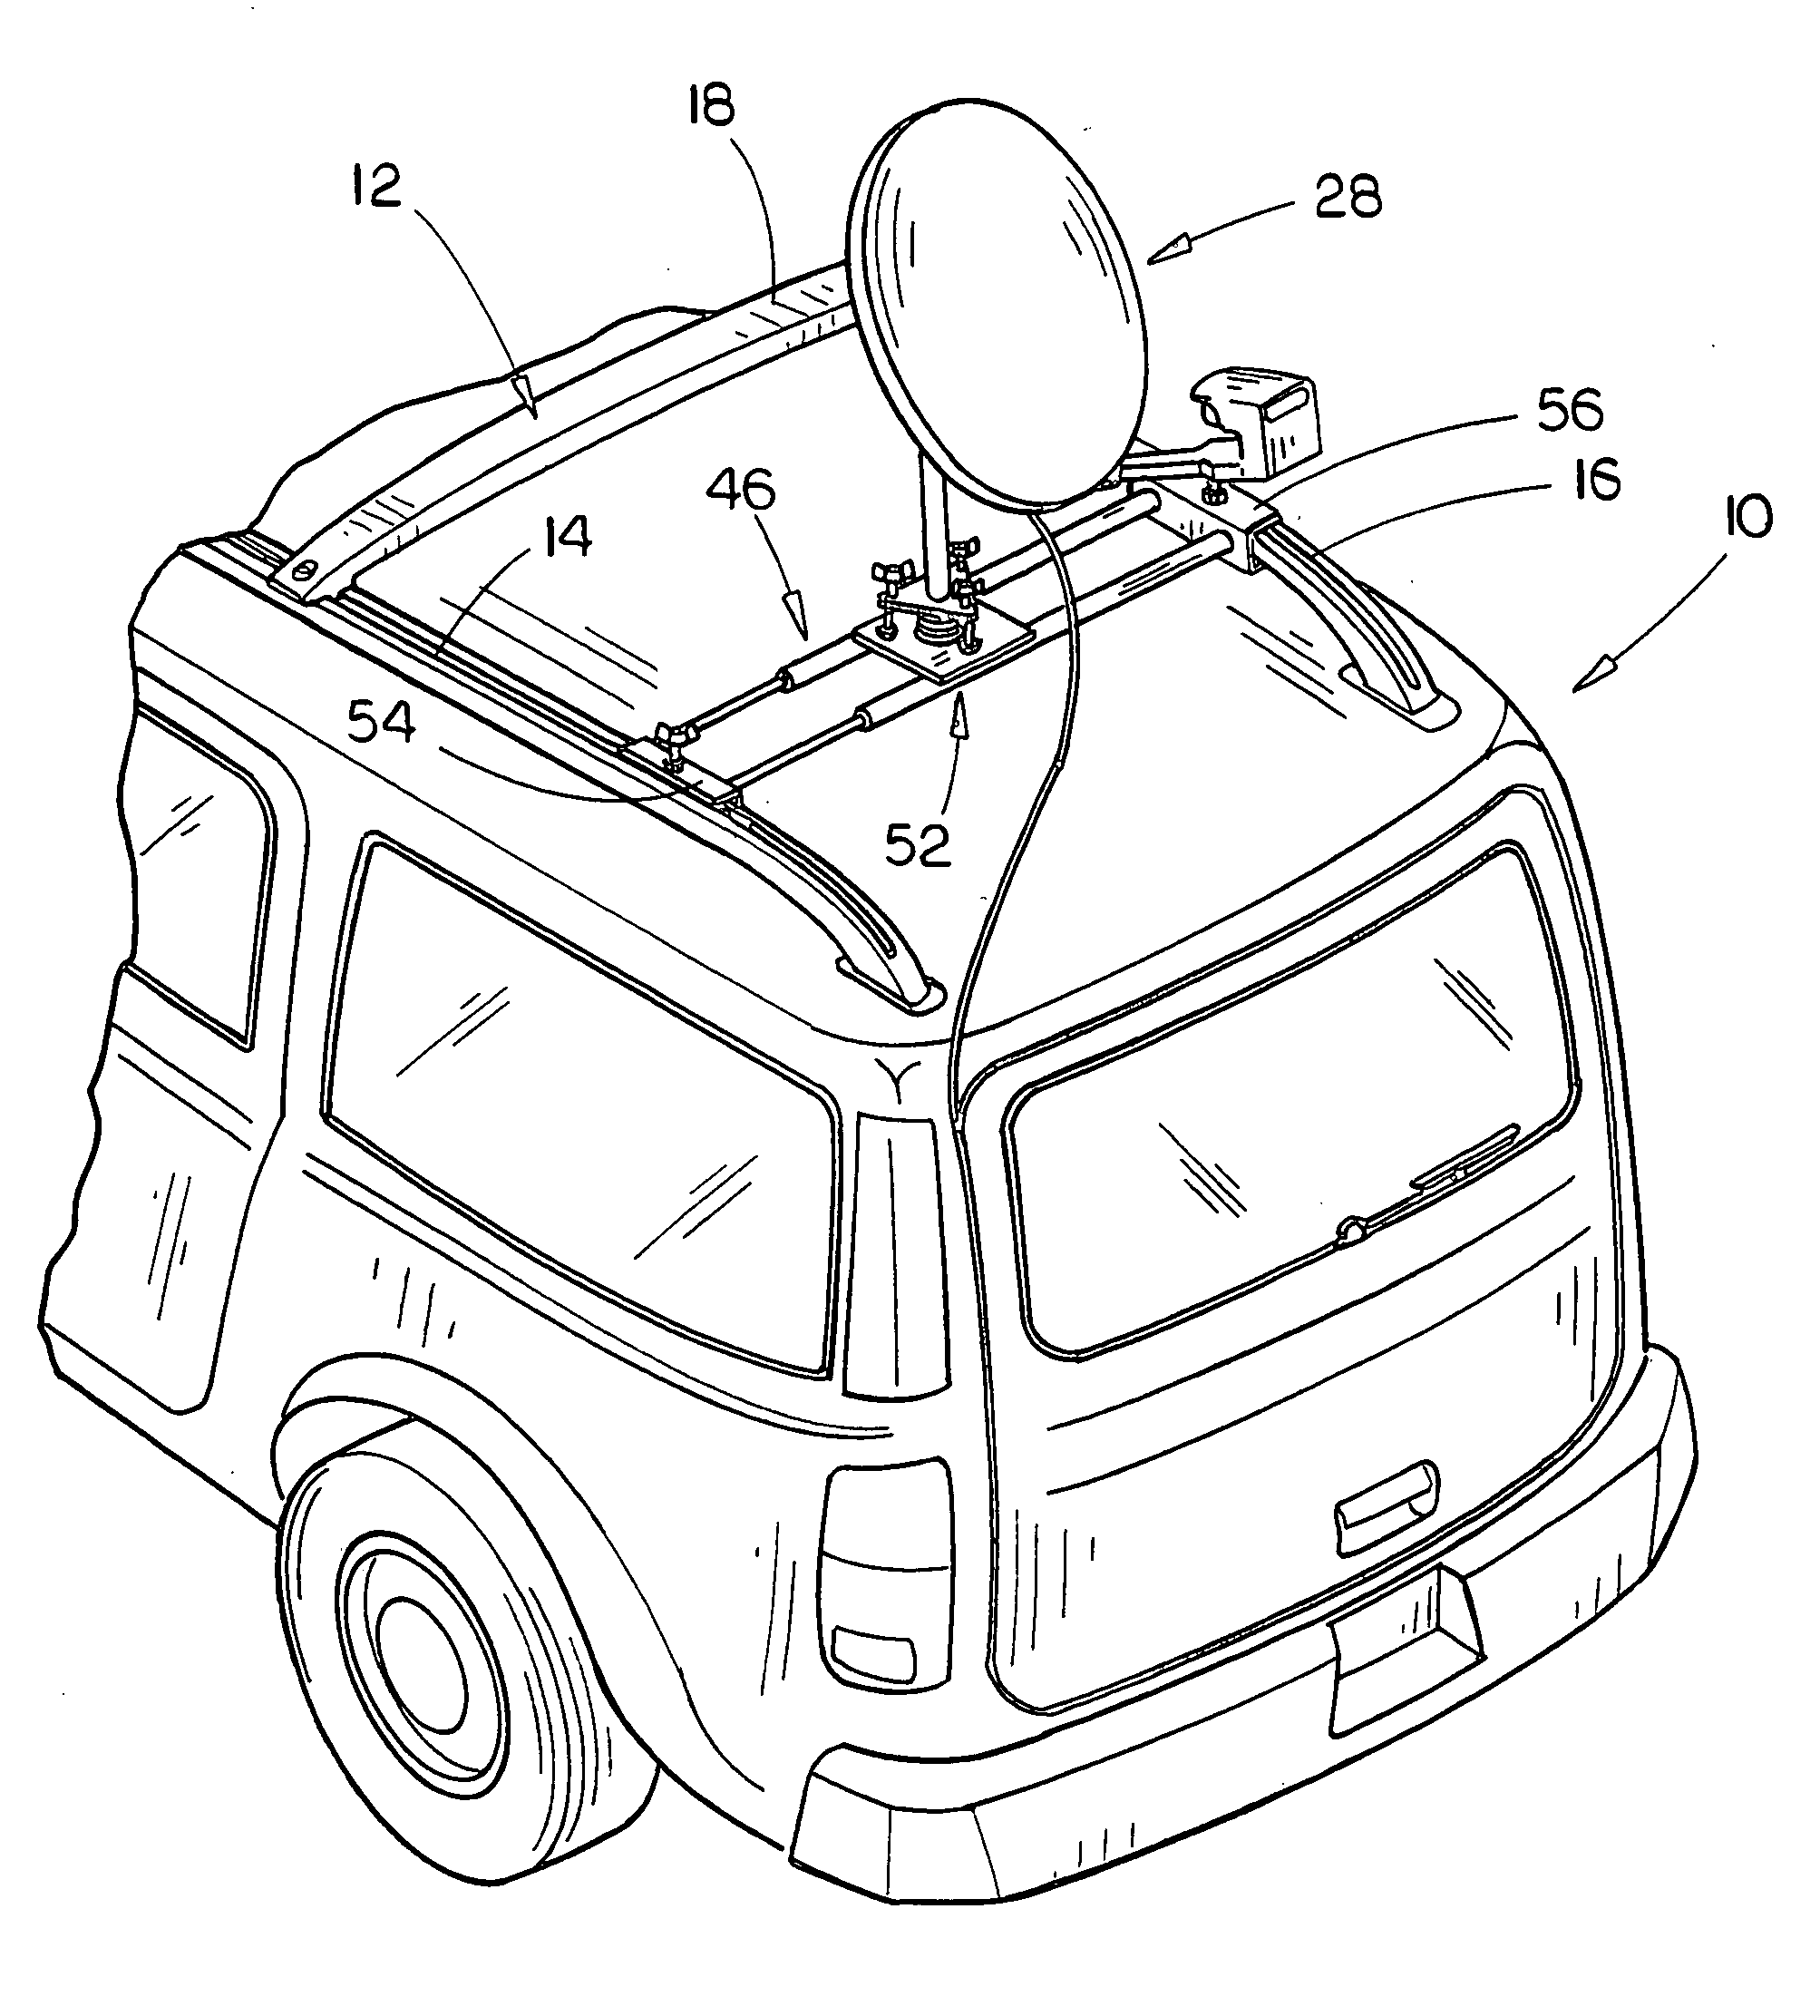 Means for mounting a portable satellite antenna on a vehicle